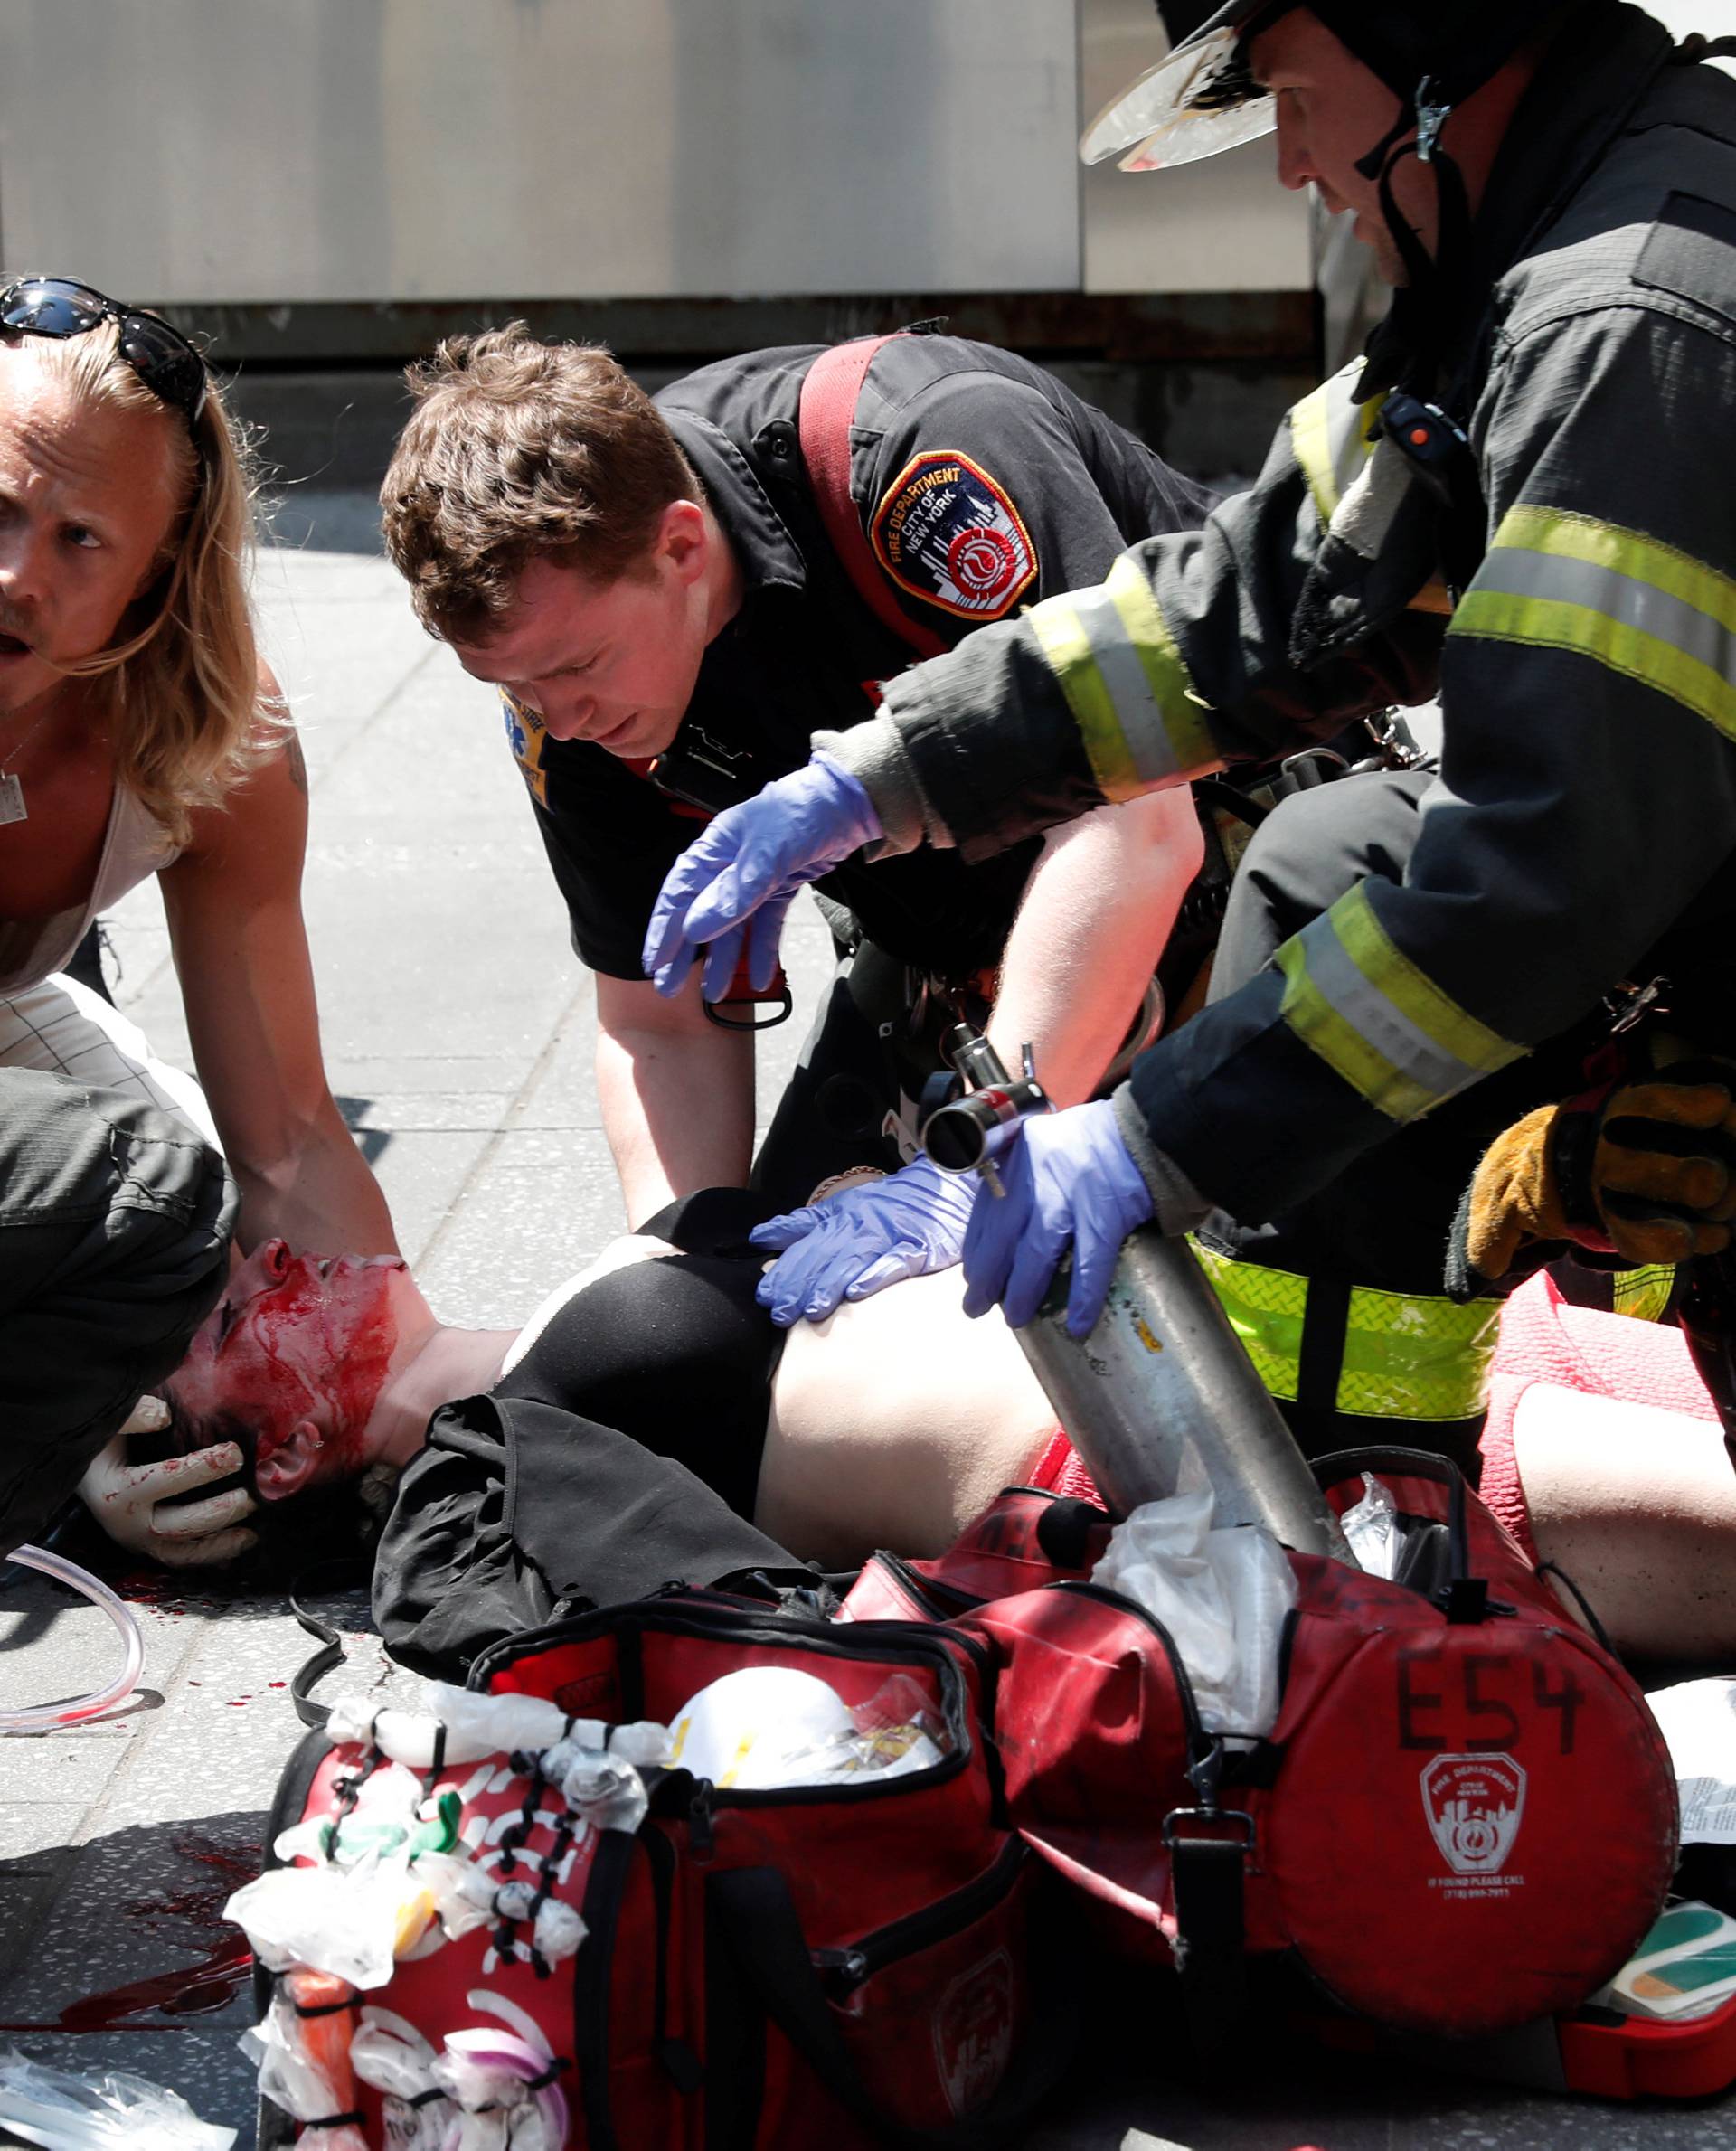 An injured woman is helped by emergency workers as she lies on the sidewalk in Times Square after a speeding vehicle struck pedestrians on the sidewalk in New York City